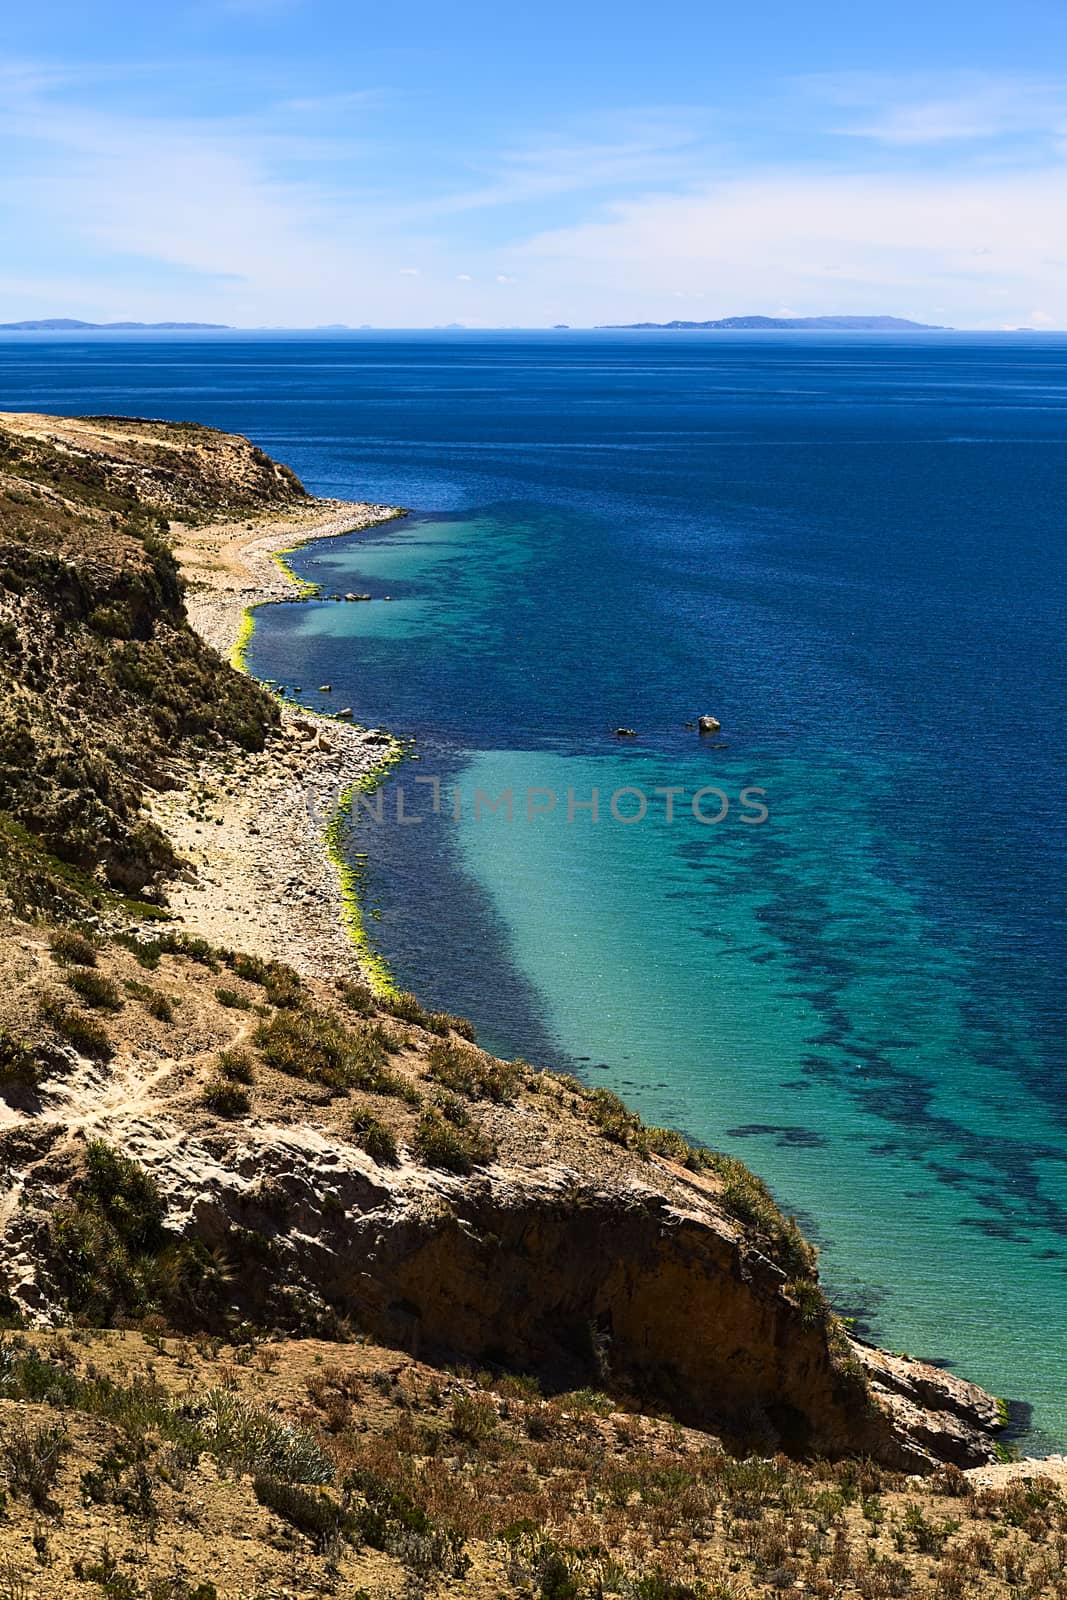 Shoreline on the northern tip of the popular travel destination Isla del Sol (Island of the Sun) in Lake Titicaca close to Copacabana in Bolivia